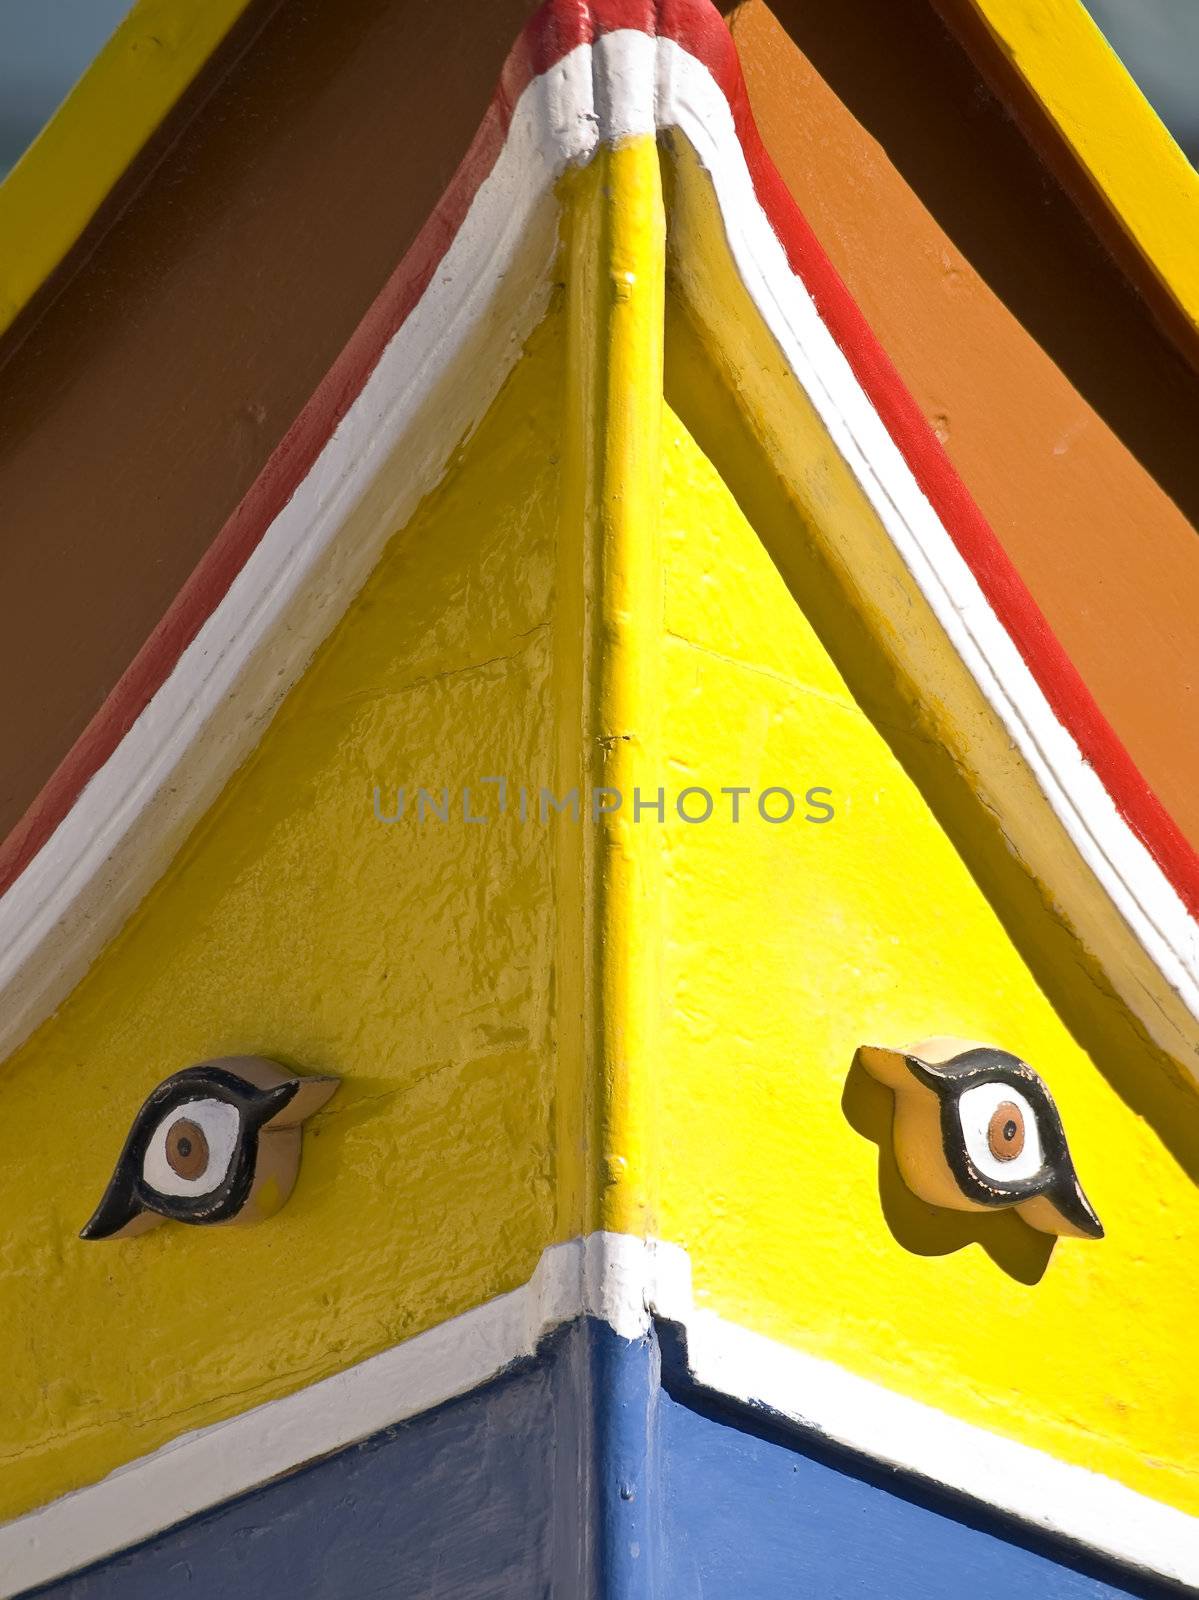 The traditional colours of the Malta fishing boat with eyes of Horus